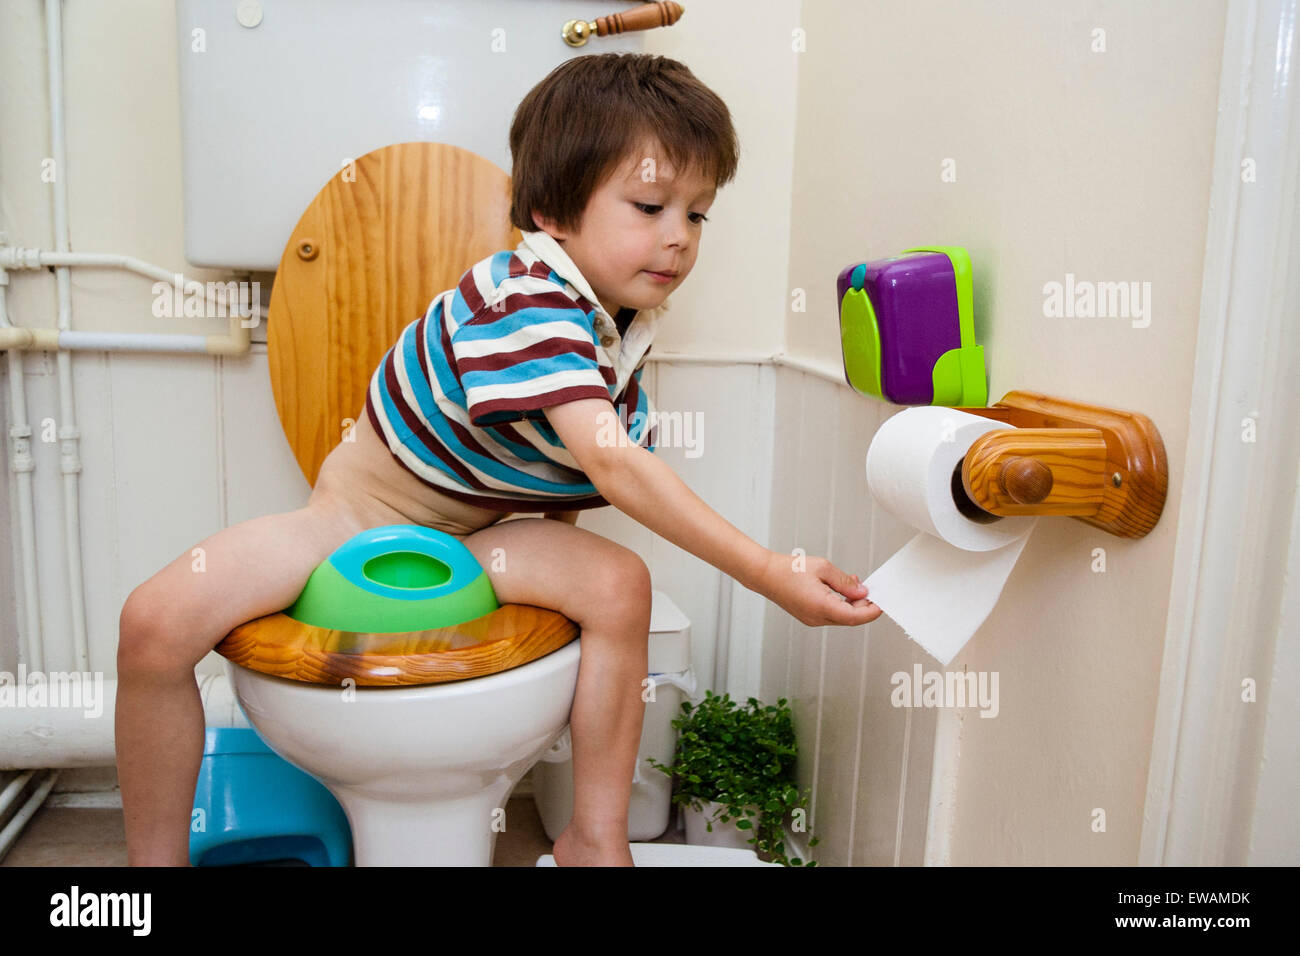 Boy On Toilet High Resolution Stock Photography and Images - Alamy